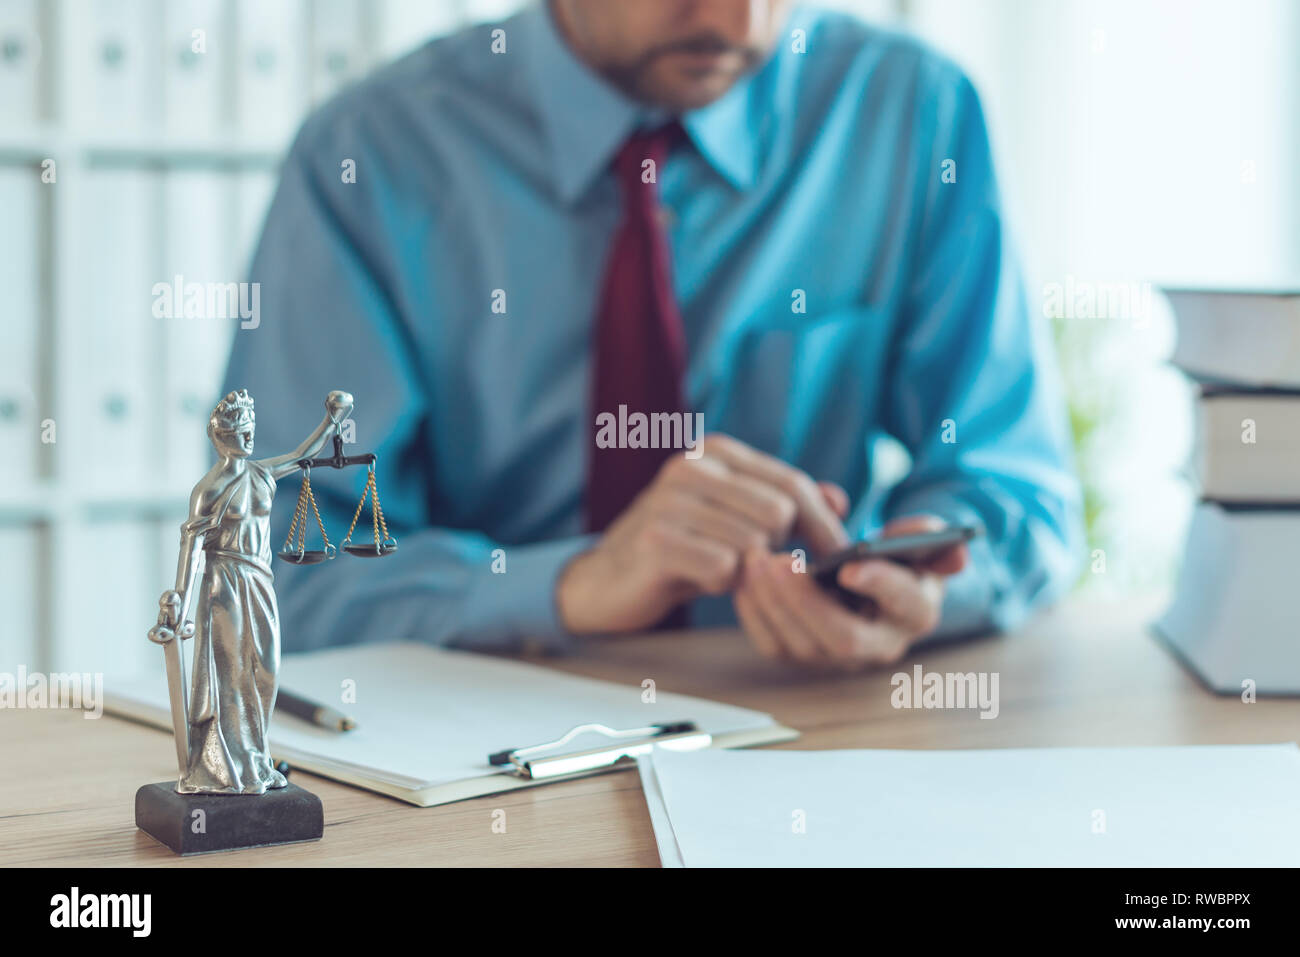 Attorney texting on mobile device in law office, selective focus on statue of Lady Justice Stock Photo